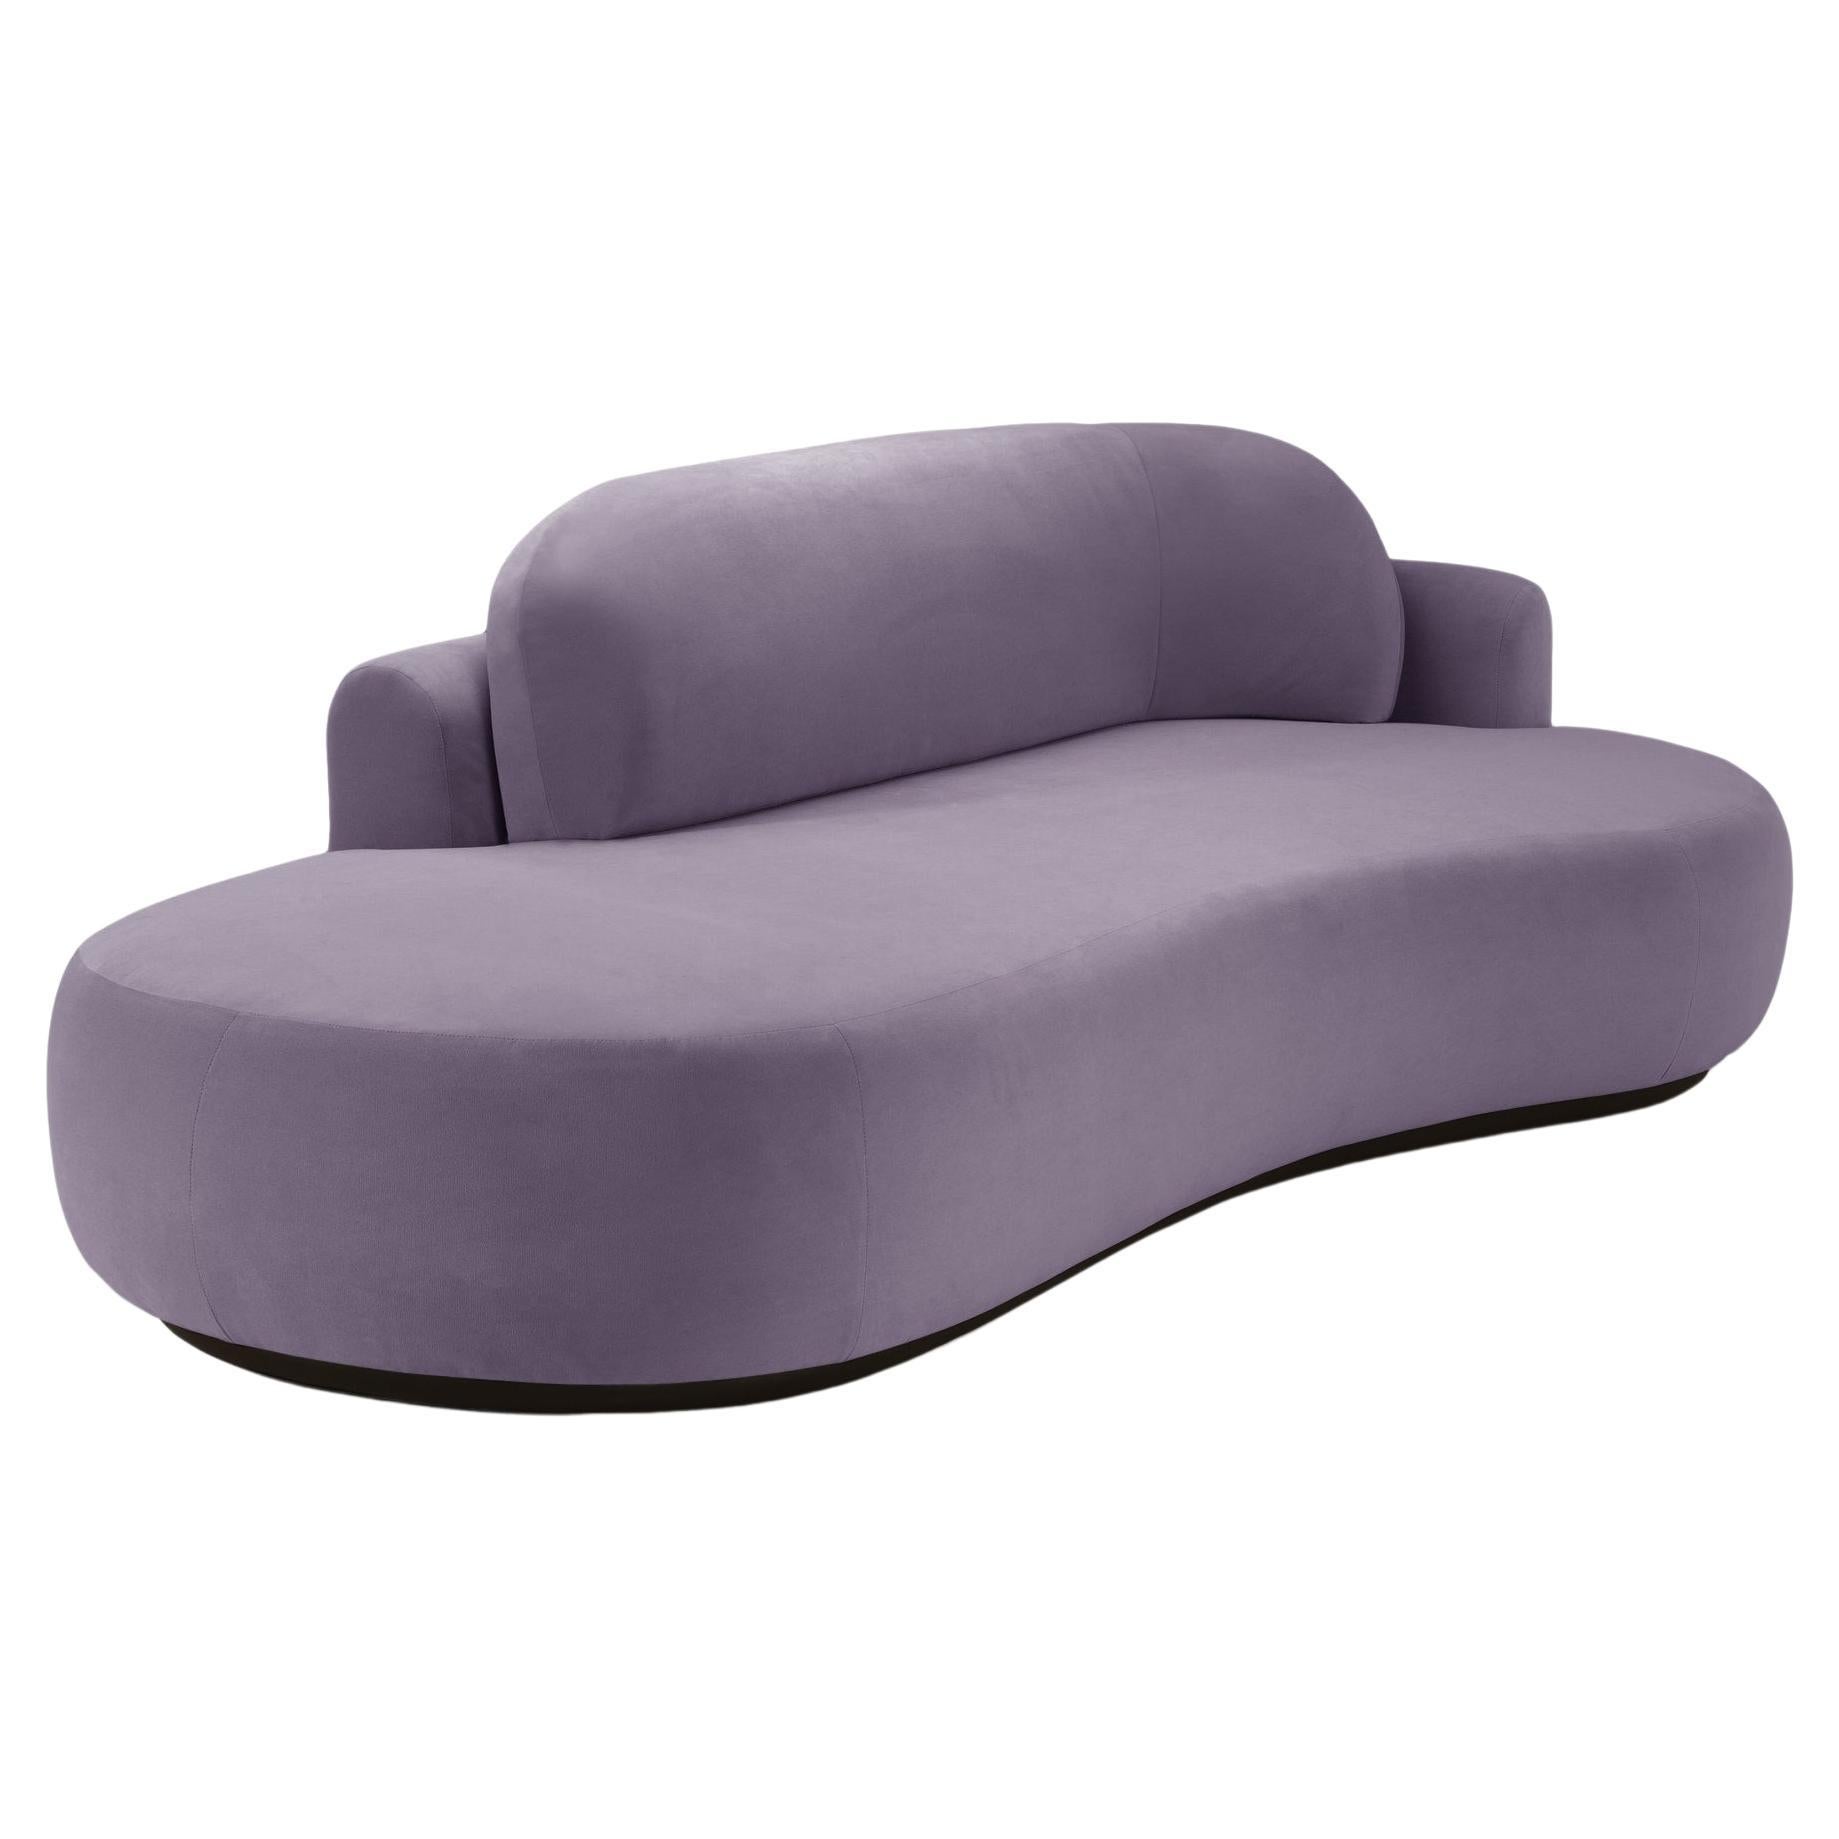 Naked Curved Sofa Single with Beech Ash-056-5 and Paris Lavanda